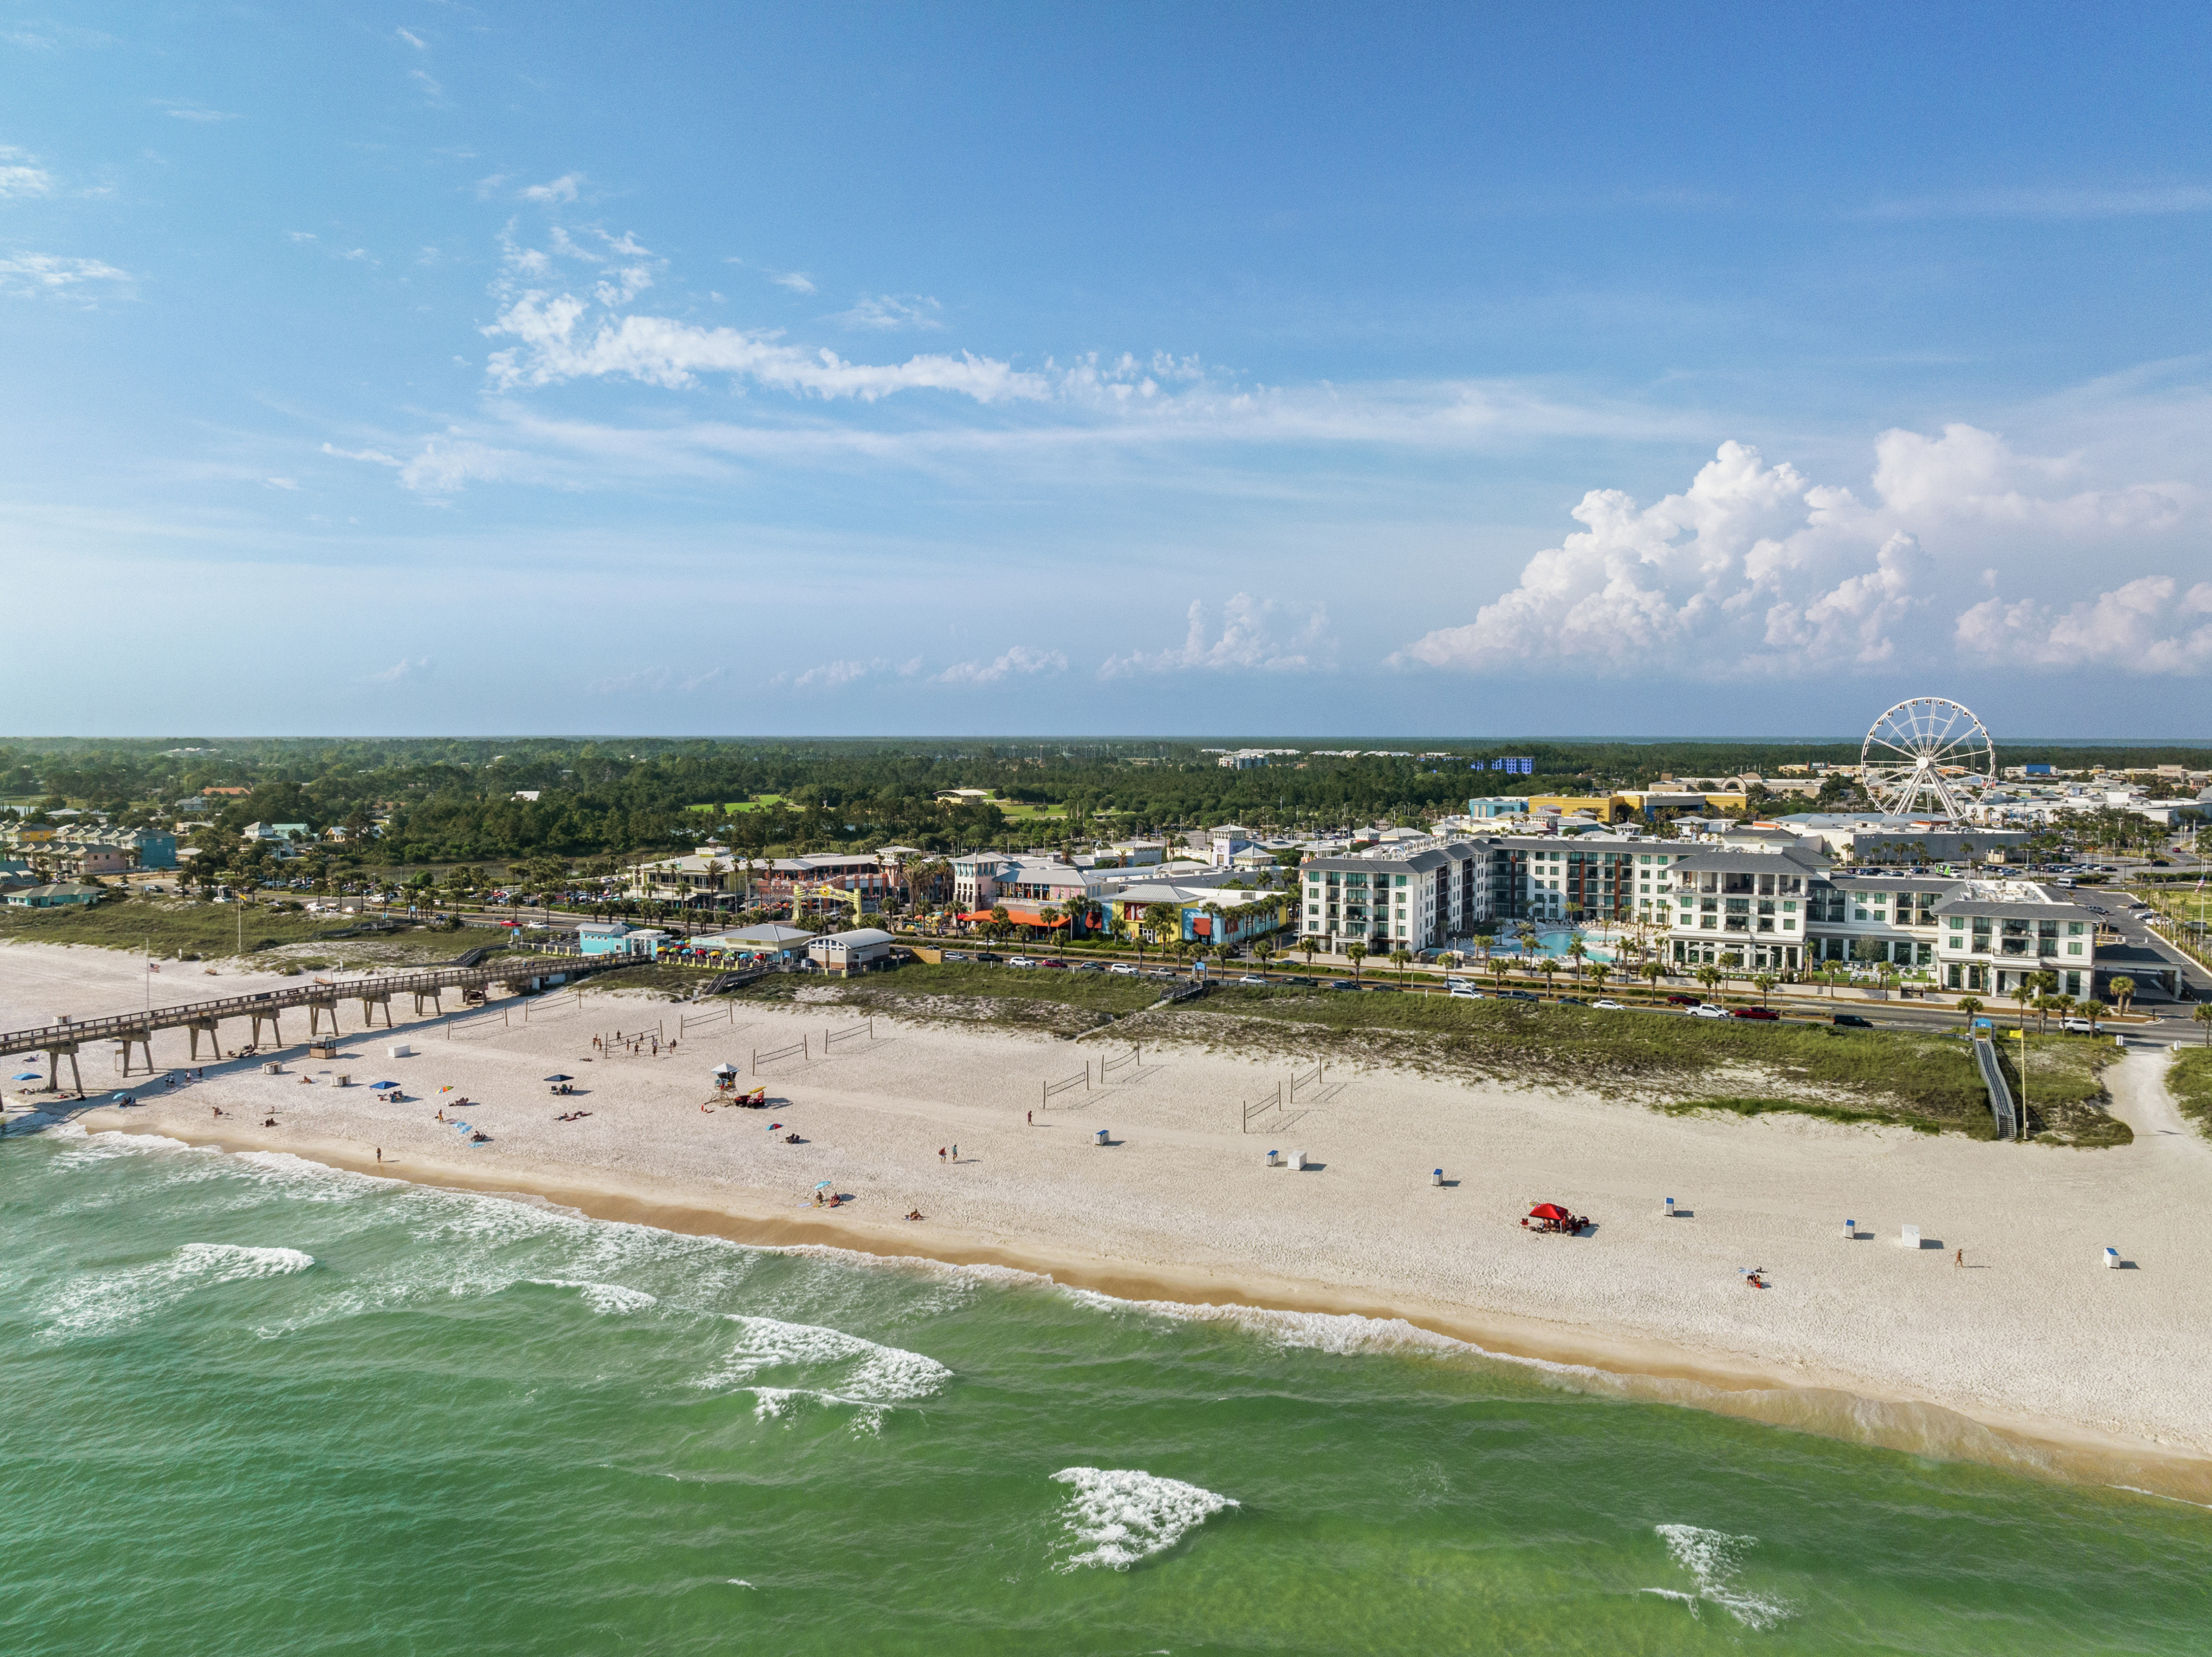 Stunning overhead exterior view of the hotel as seen from the ocean and beach just steps from the property.